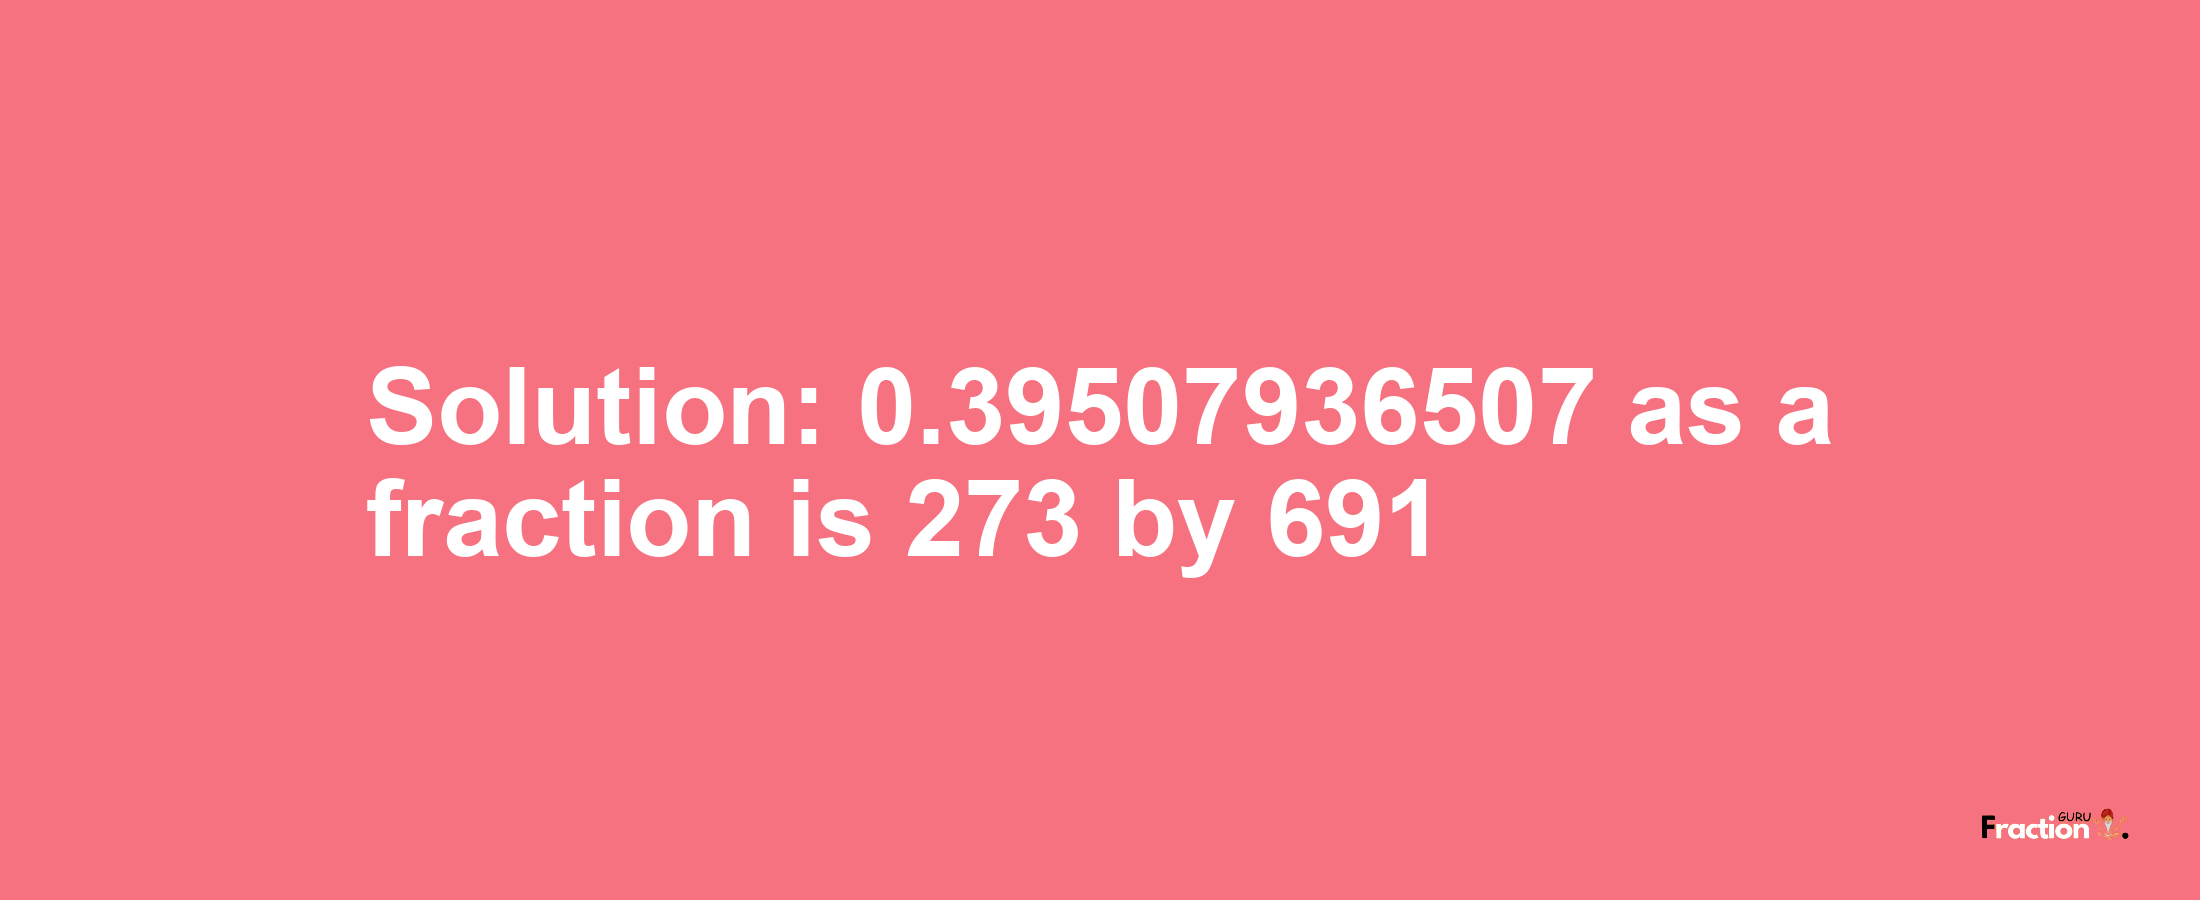 Solution:0.39507936507 as a fraction is 273/691